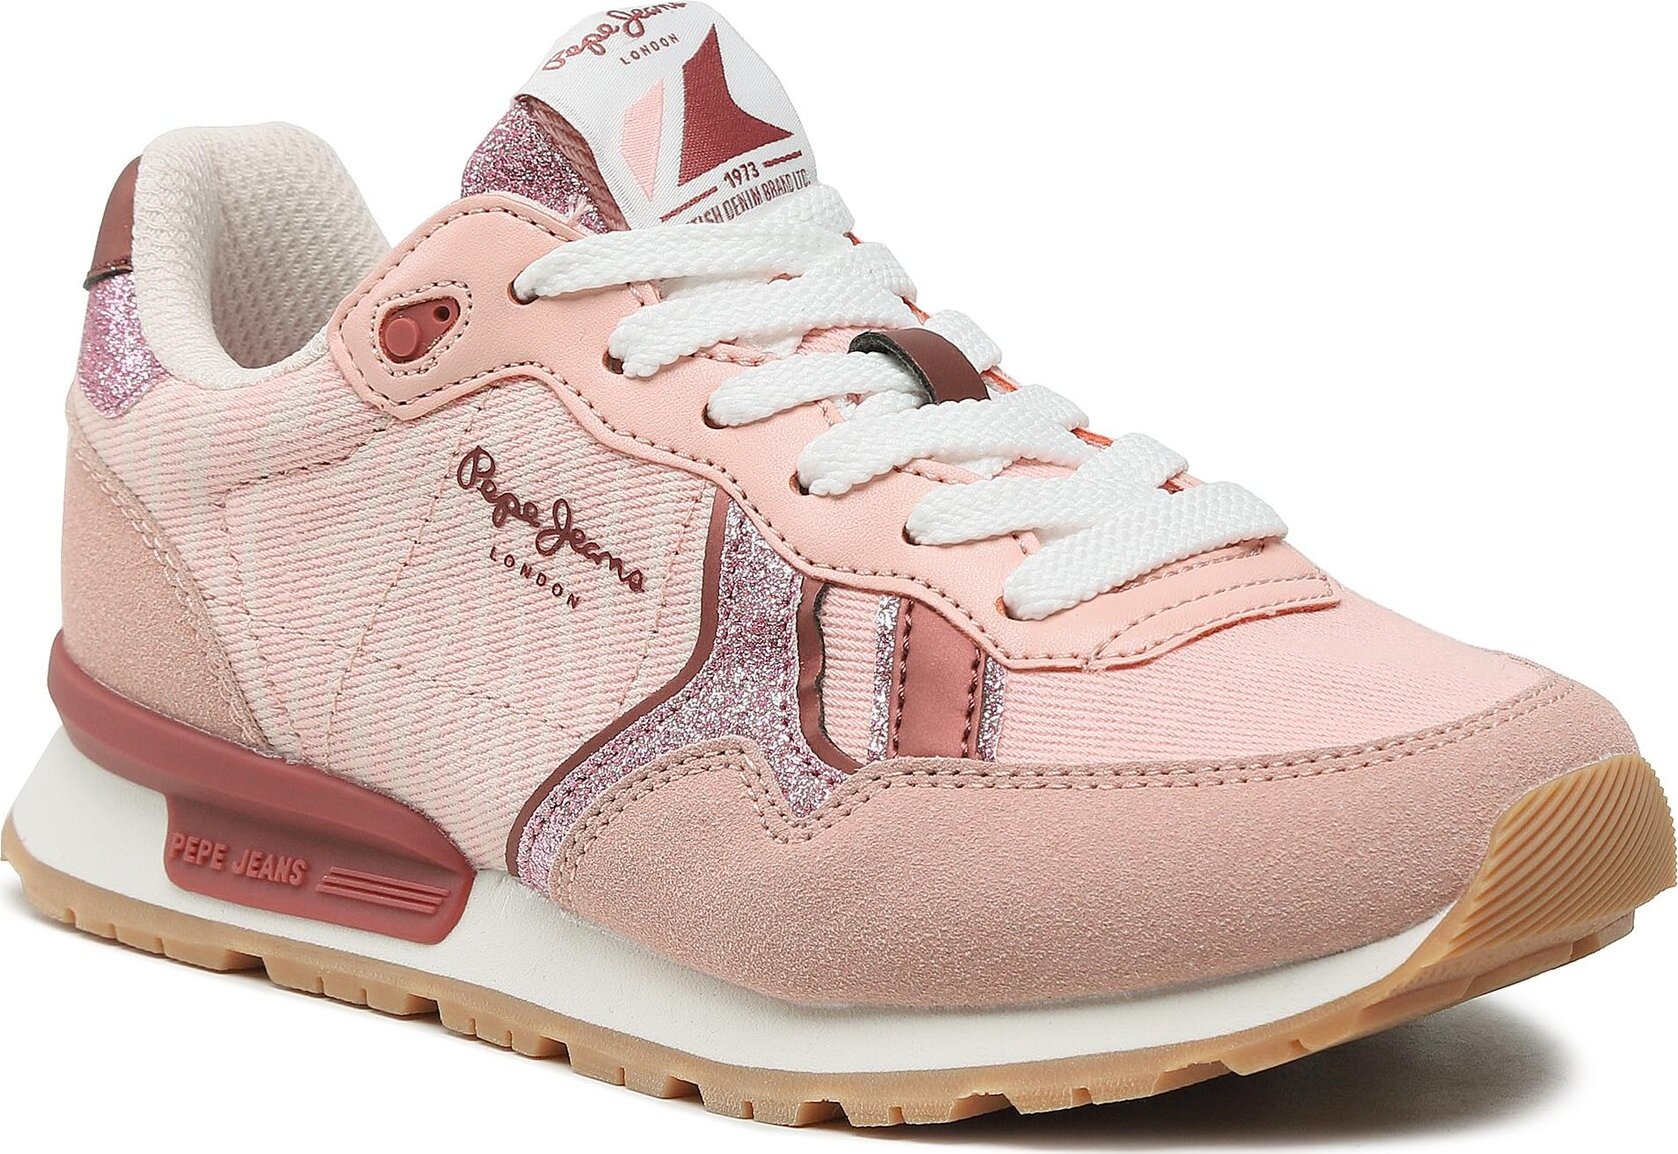 Sneakersy Pepe Jeans Brit Animal G PGS30574 Mauve Pink 319